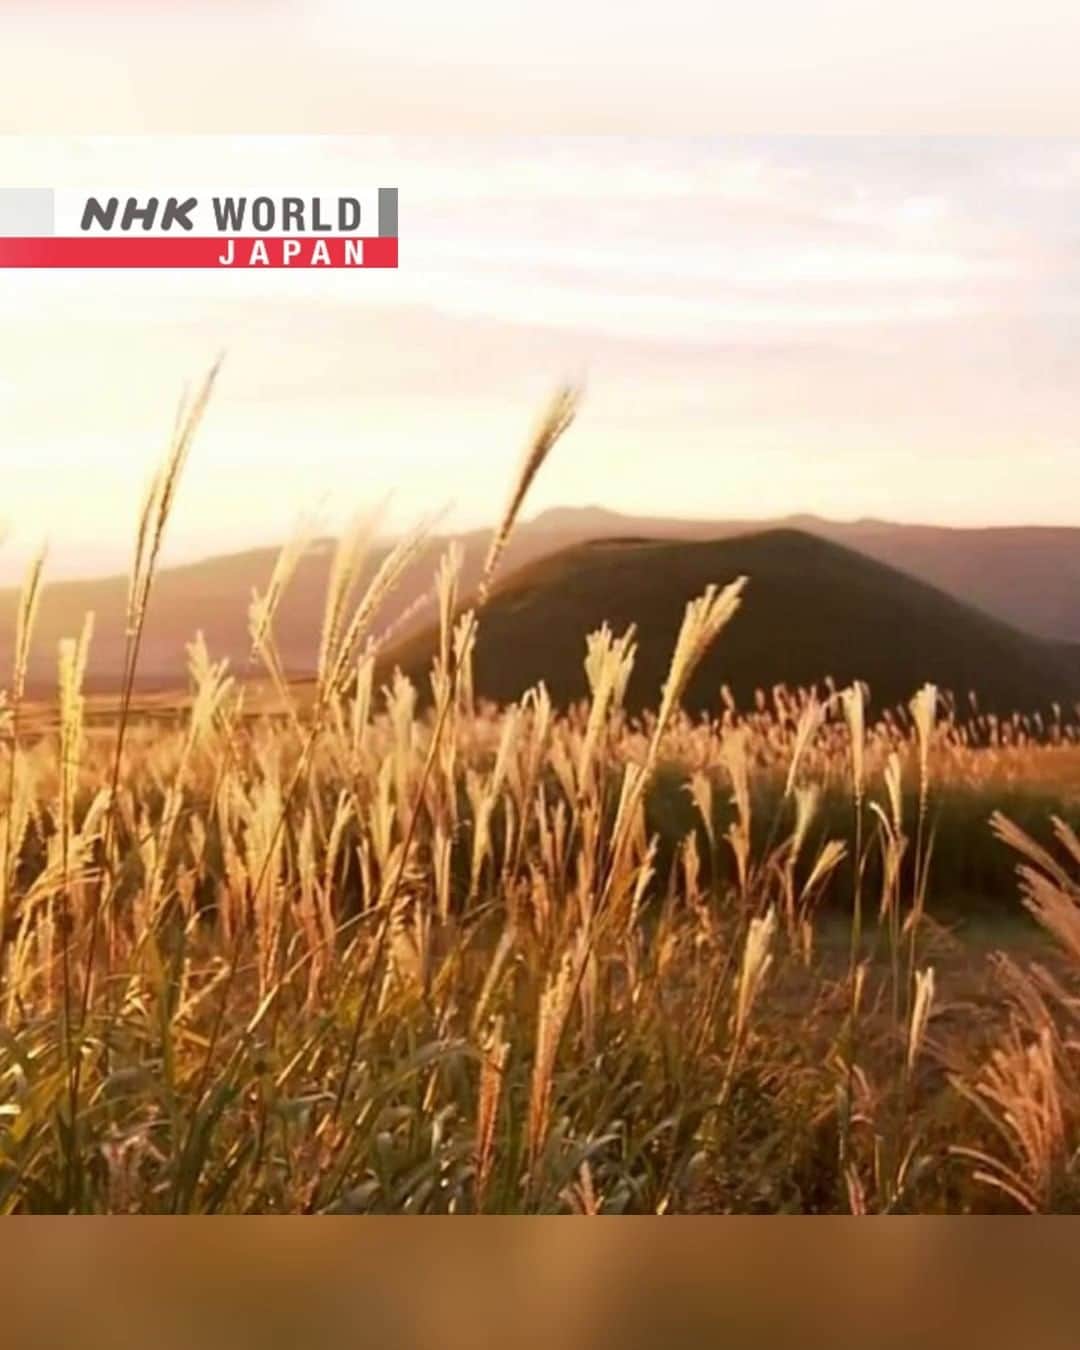 NHK「WORLD-JAPAN」のインスタグラム：「During autumn in Kumamoto, wild 'silver grass' called 'susuki' (Japanese pampas grass) lends a shimmering hue to the landscape. 🎑  Come winter, this autumn plant will be harvested to make thatched roofs and will also be used as straw bedding in livestock barns.🐮🐴  Have you seen susuki in Japan? . 👉Watch more short clips｜Free On Demand｜News｜Video｜NHK WORLD-JAPAN website.👀 . 👉Tap in Stories/Highlights to get there.👆 . 👉Follow the link in our bio for more on the latest from Japan. . 👉If we’re on your Favorites list you won’t miss a post. . . #ススキ #susuki #silvergrass #japanesepampasgrass #pampas #miscanthussinensis #japannature #japanautumn #traveljapan #autumn #秋 #japantradition #discoverjapan #aso #kumamoto #nhkworldnews #nhkworldjapan #japan」